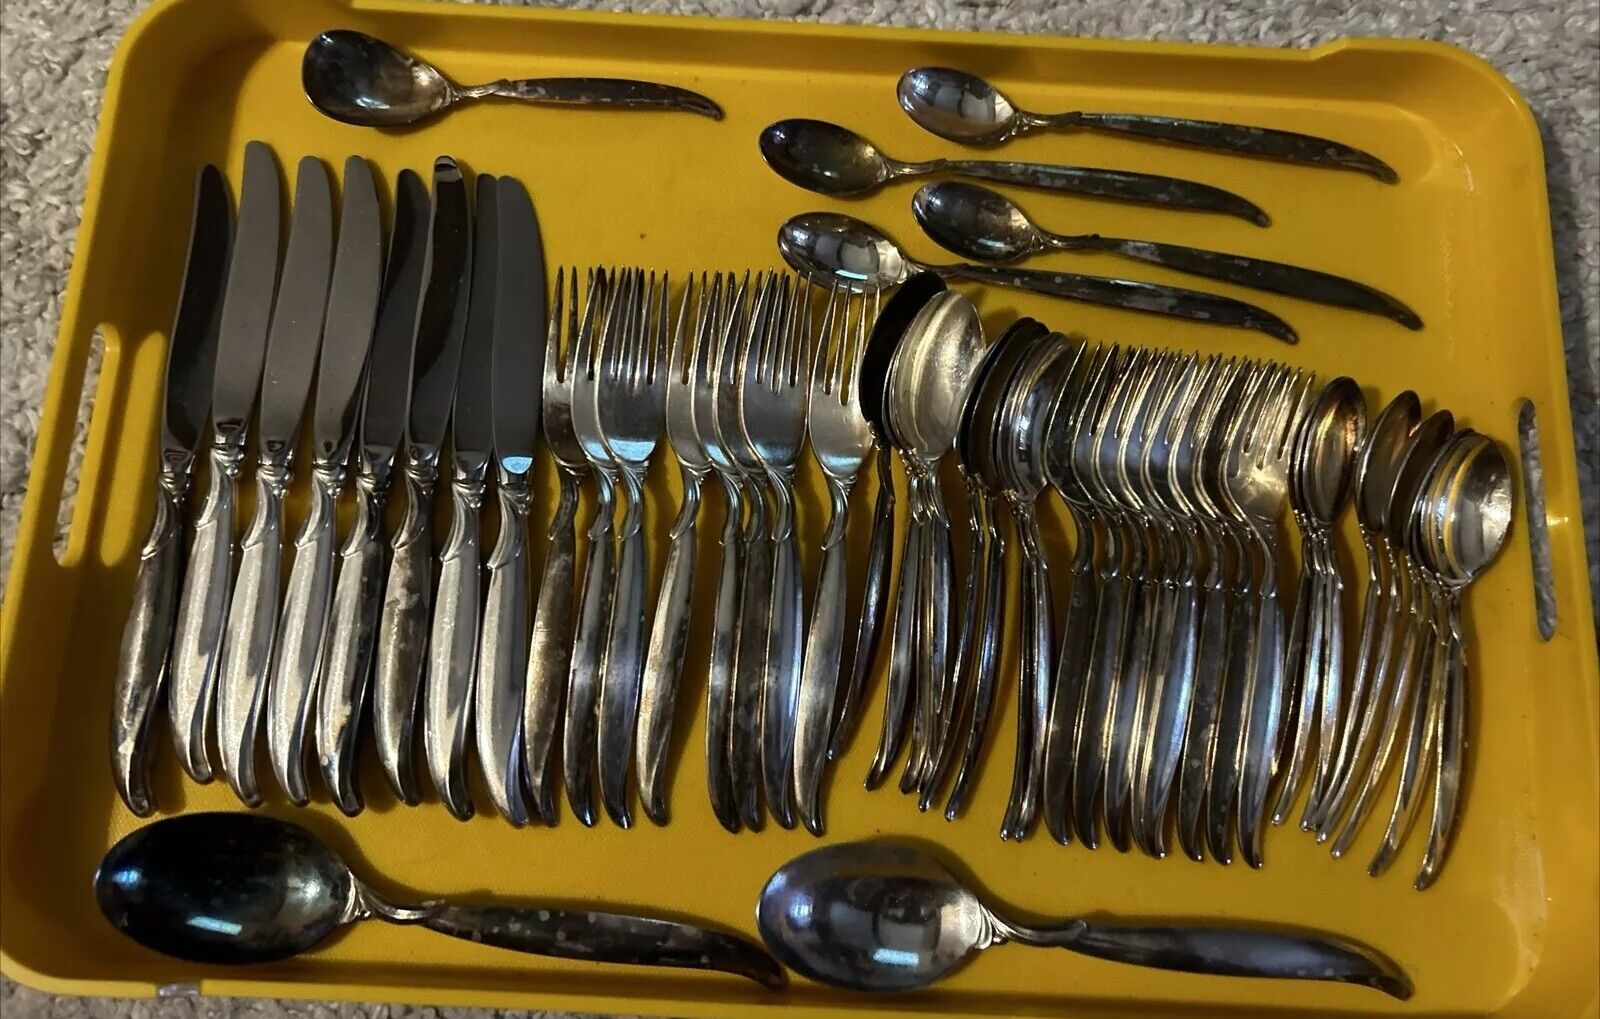 47 Pc Rogers Bros Flair 1847 International Silverplate Flatware Service For 8